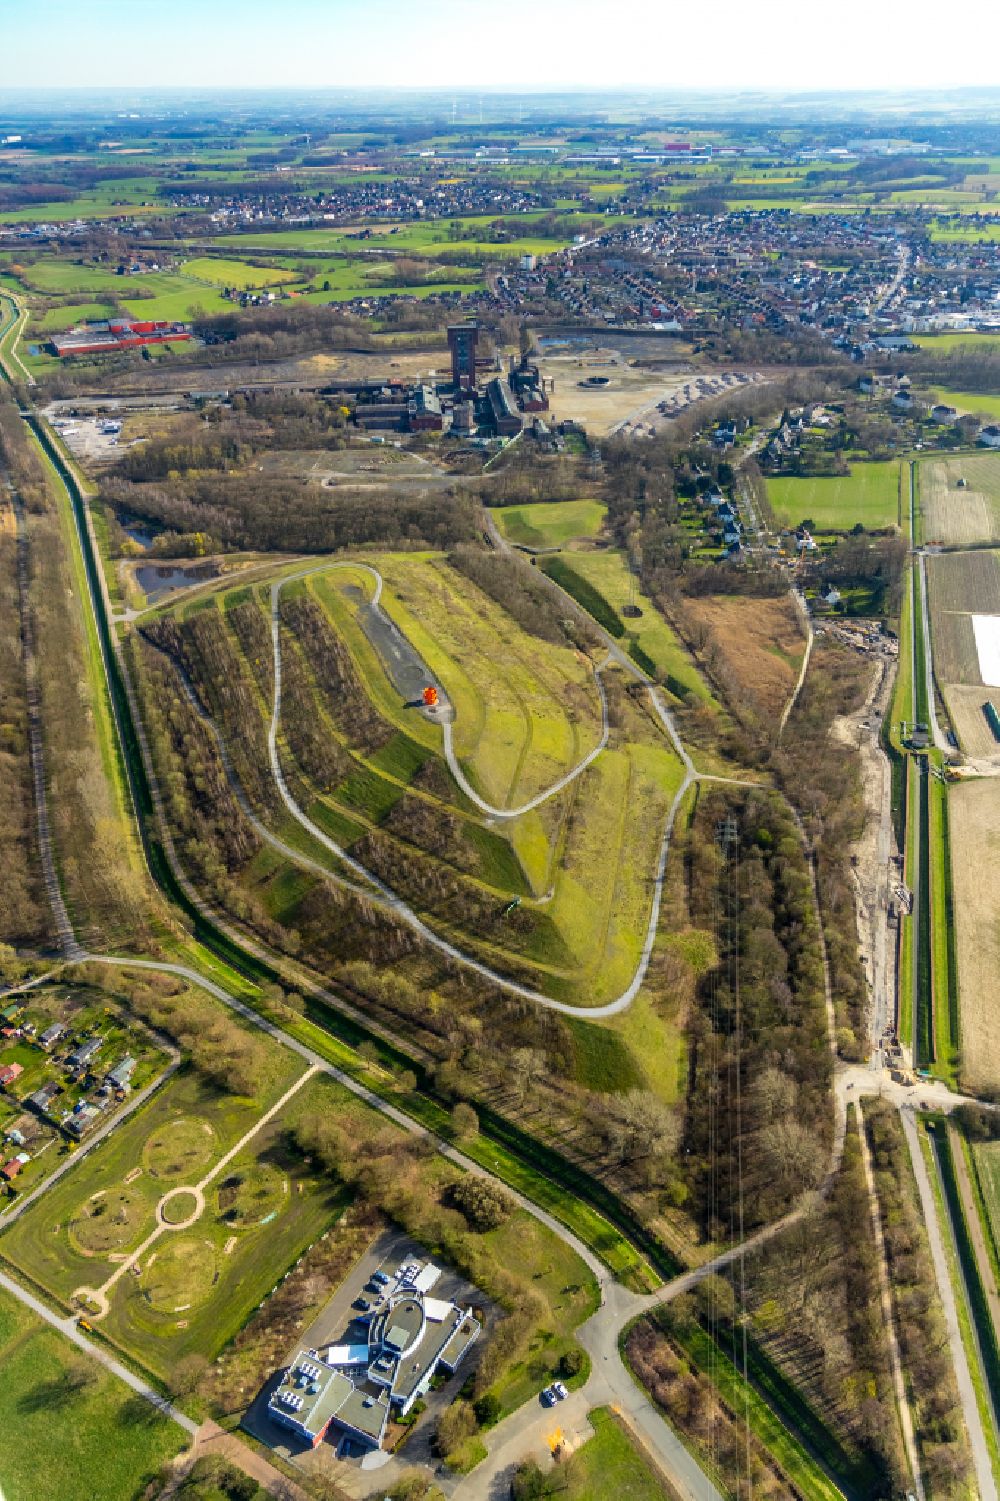 Hamm from above - wooded stockpile in Hamm in North Rhine-Westphalia